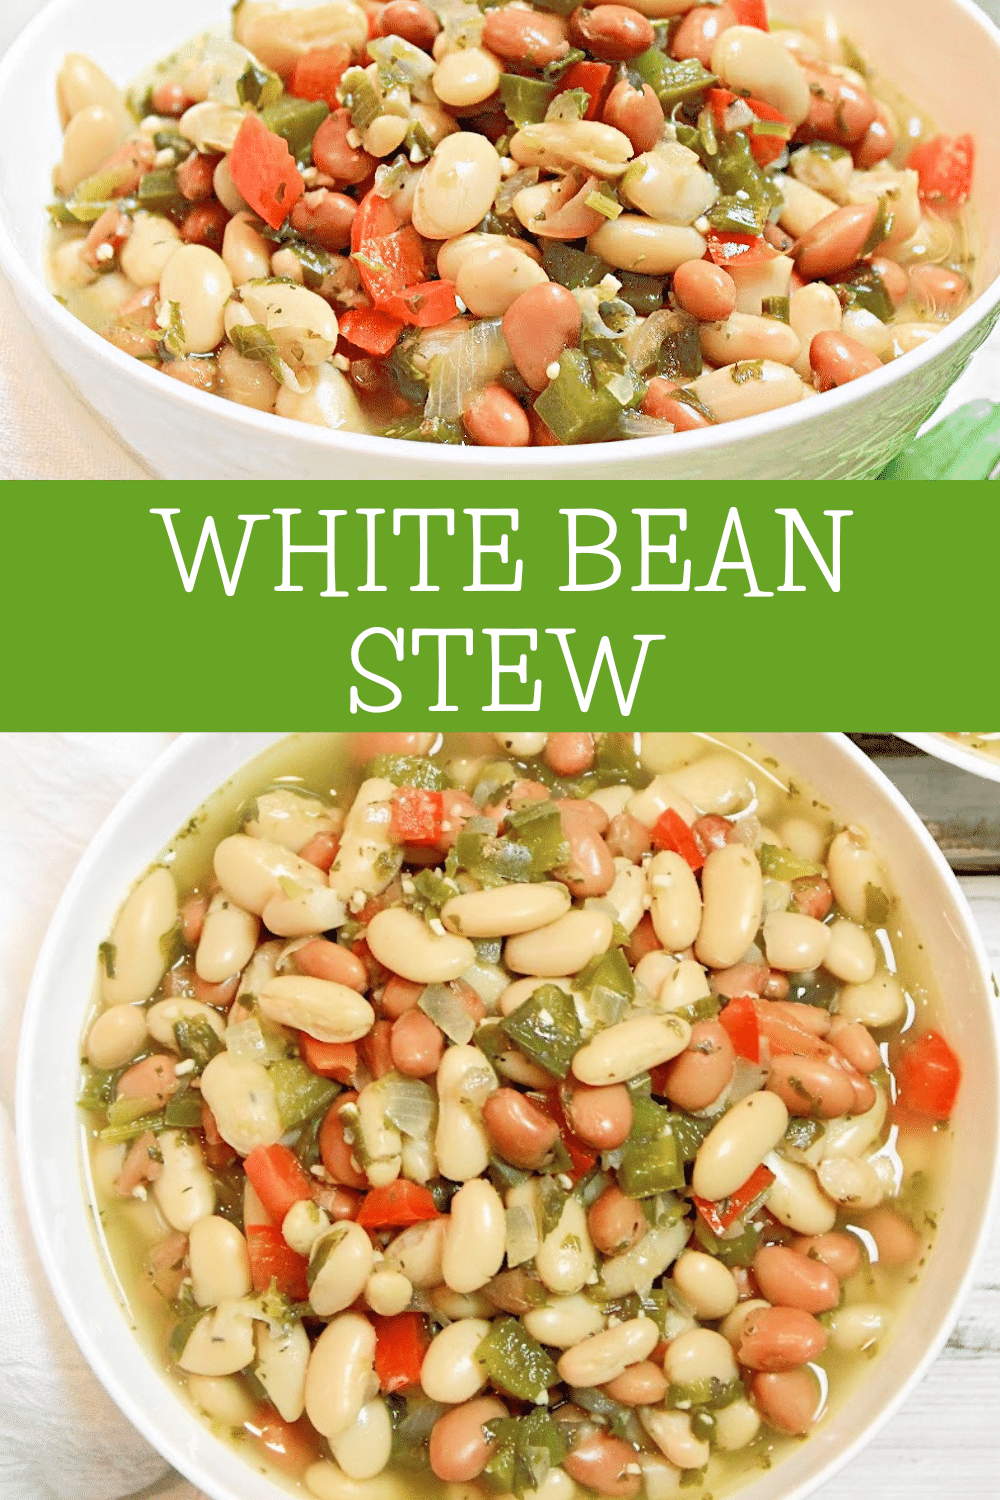 White Bean Stew ~ This hearty and aromatic stew is packed with herbaceous flavor and good-for-you ingredients! via @thiswifecooks